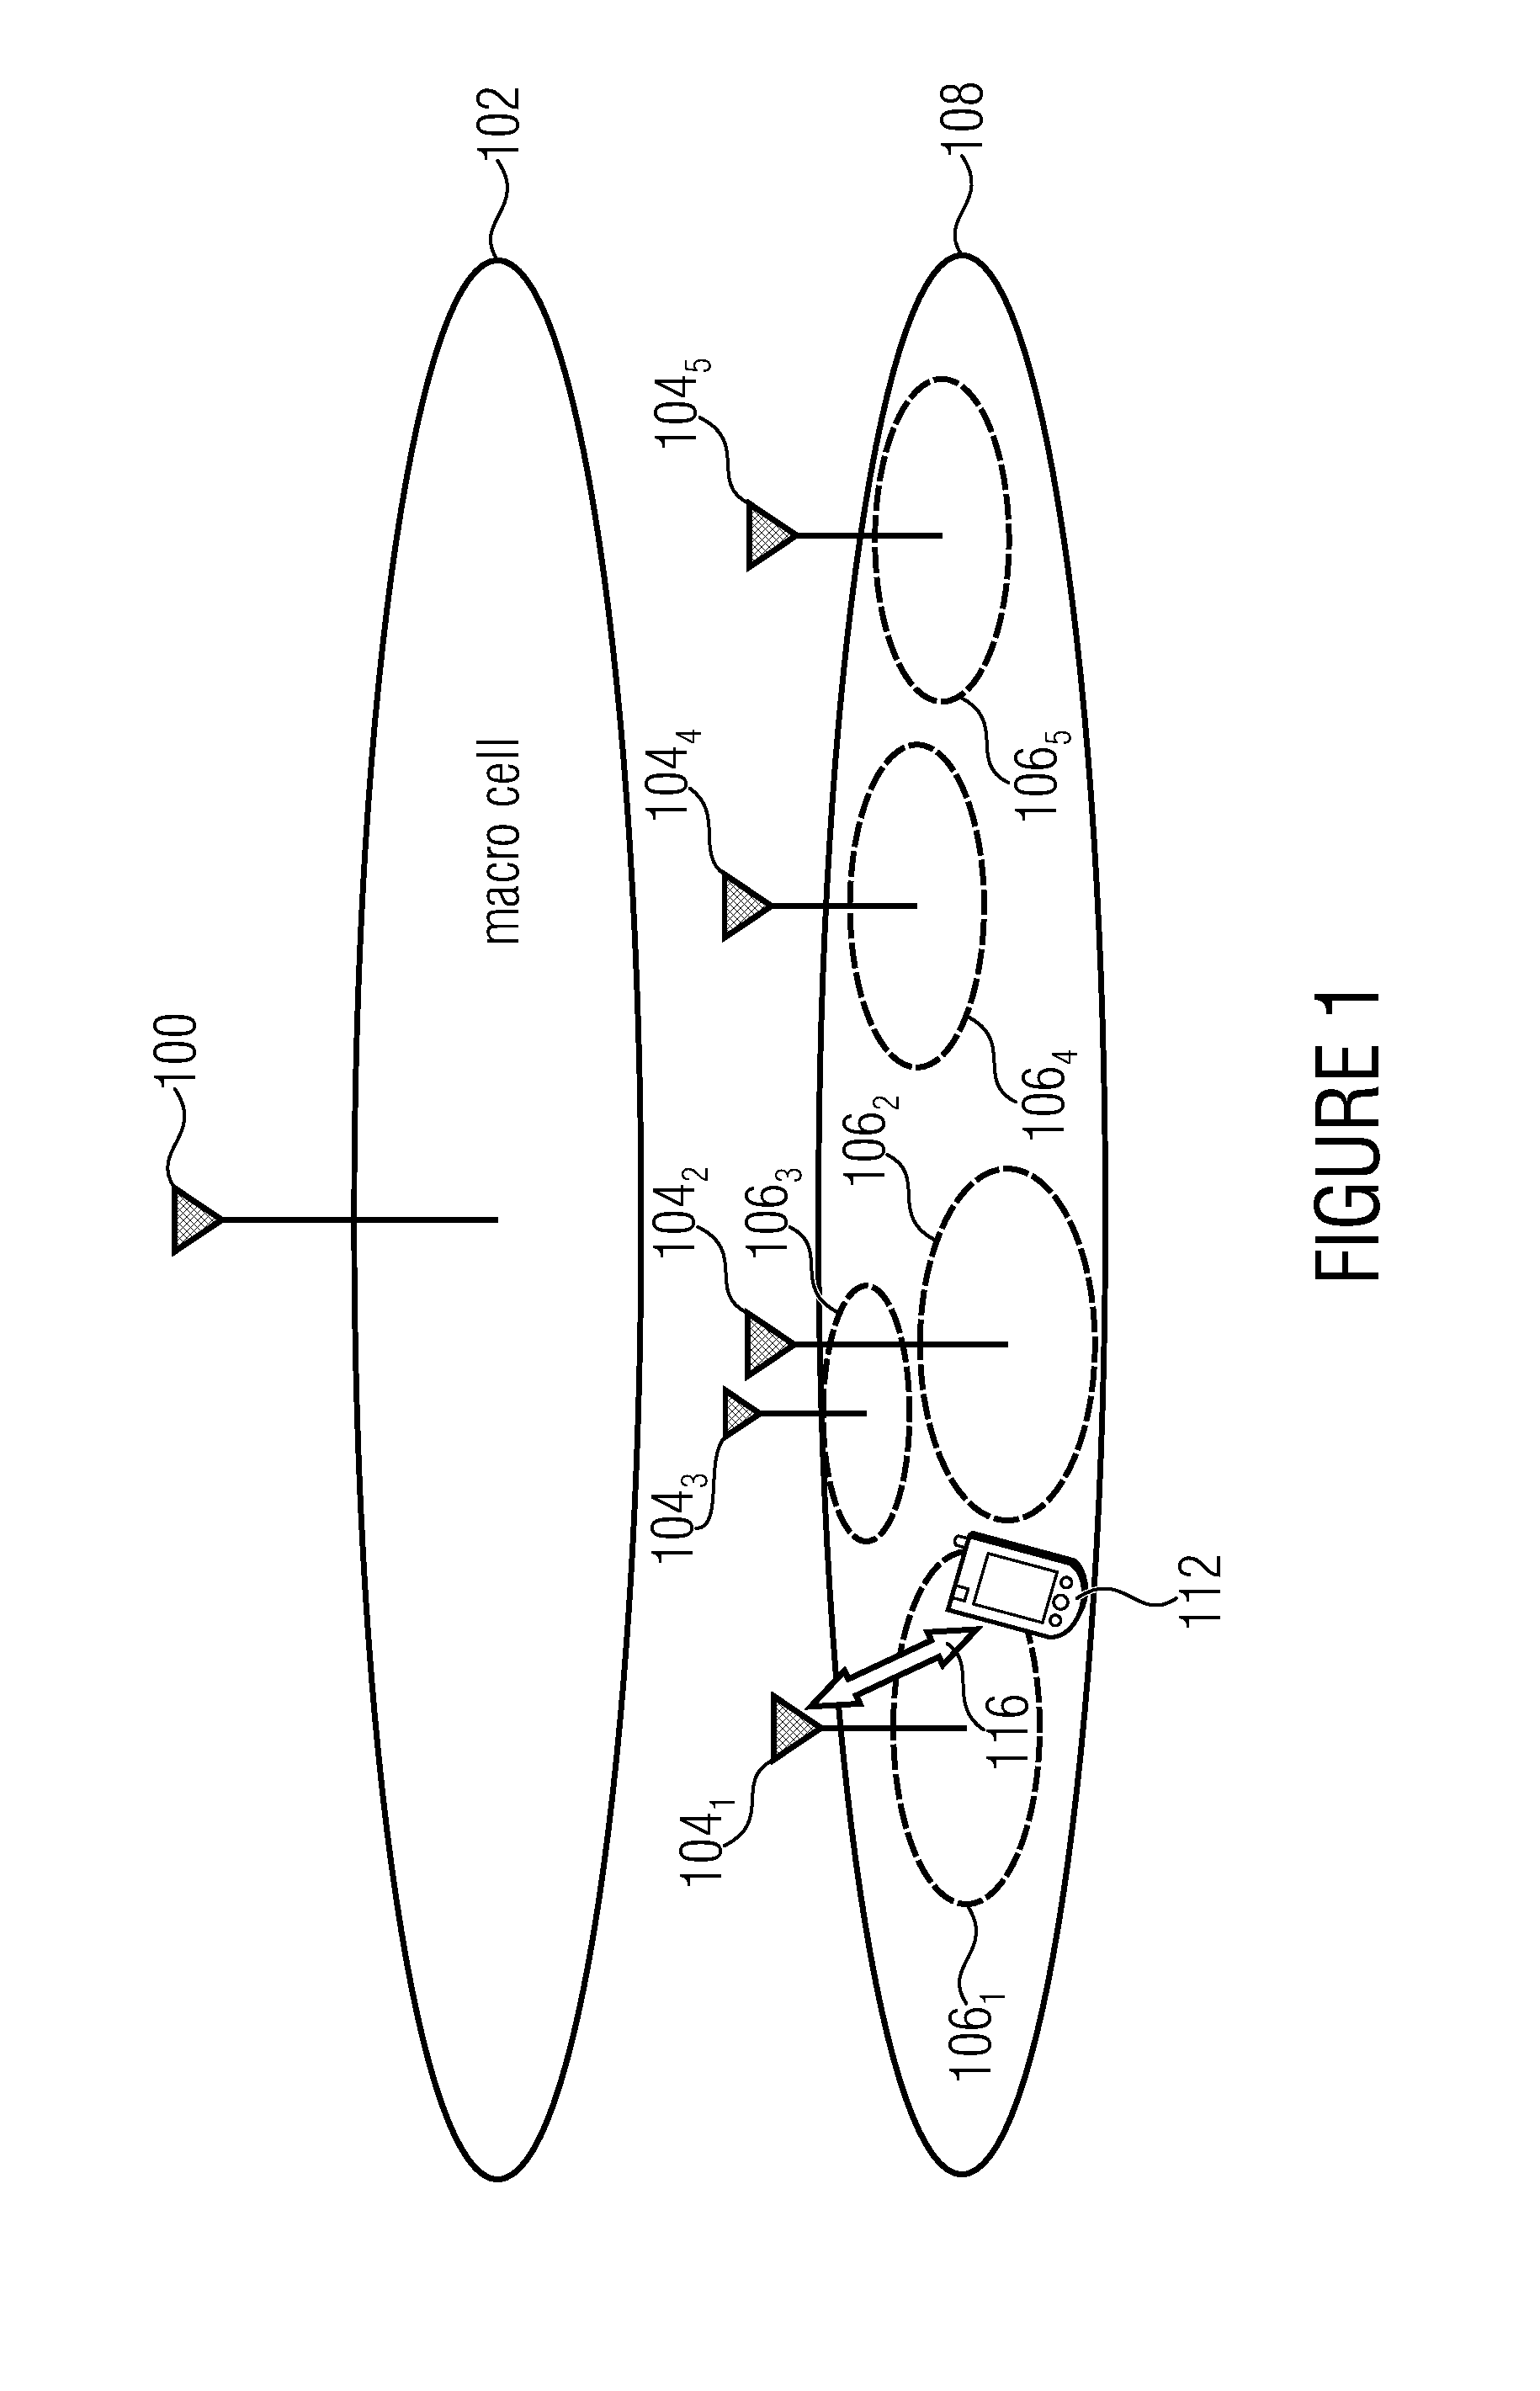 Macro-cell assisted small cell discovery and activation